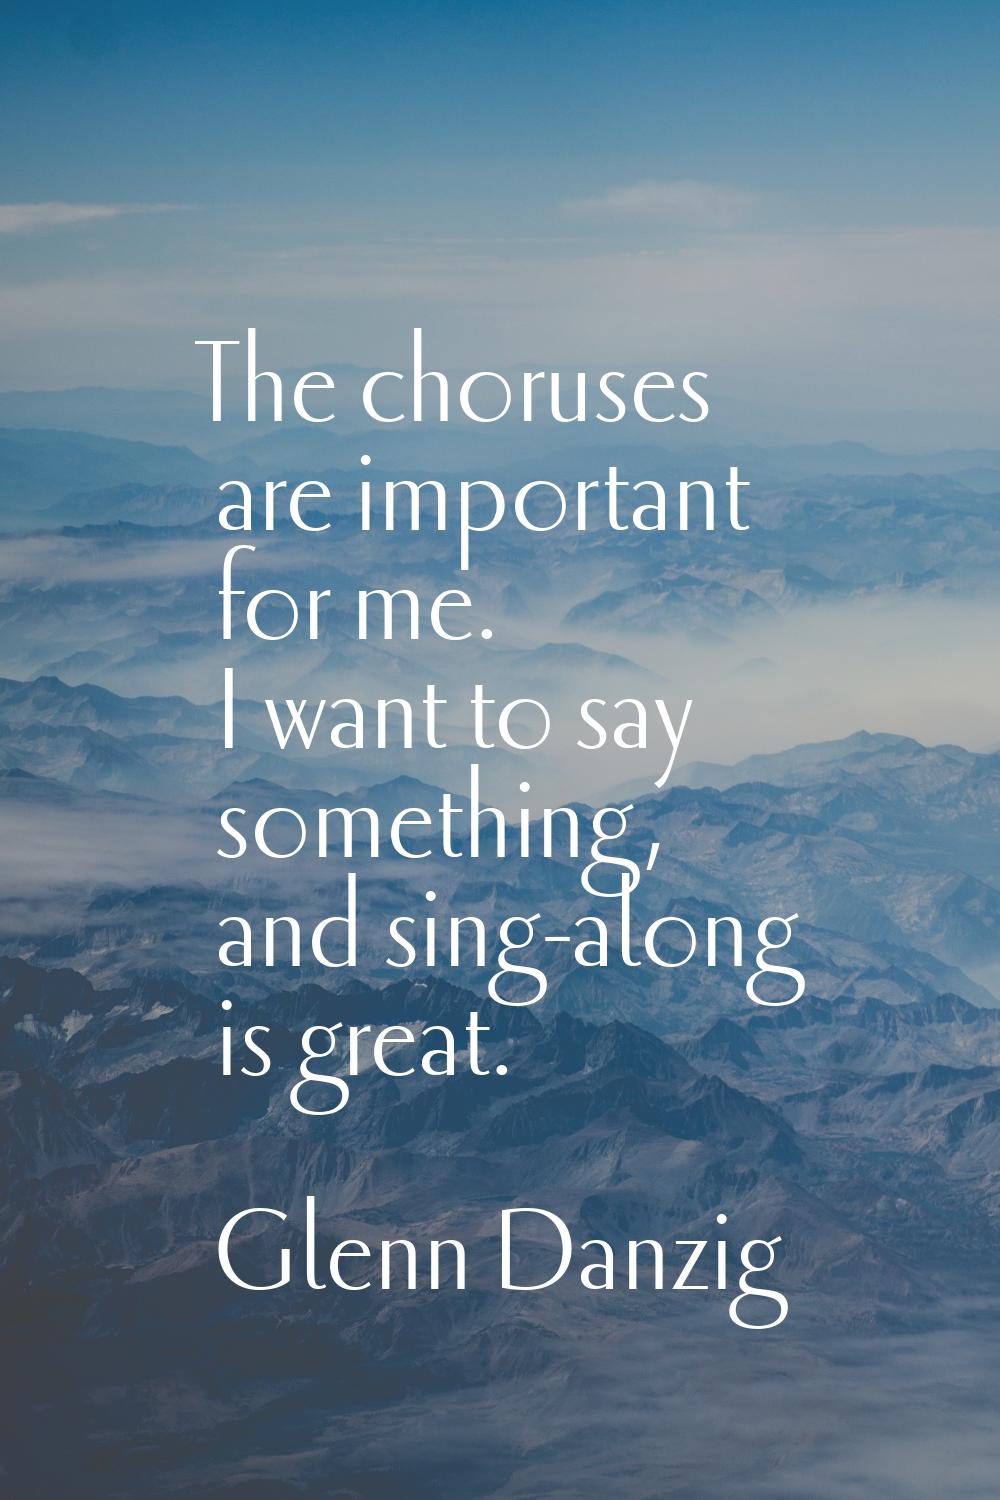 The choruses are important for me. I want to say something, and sing-along is great.